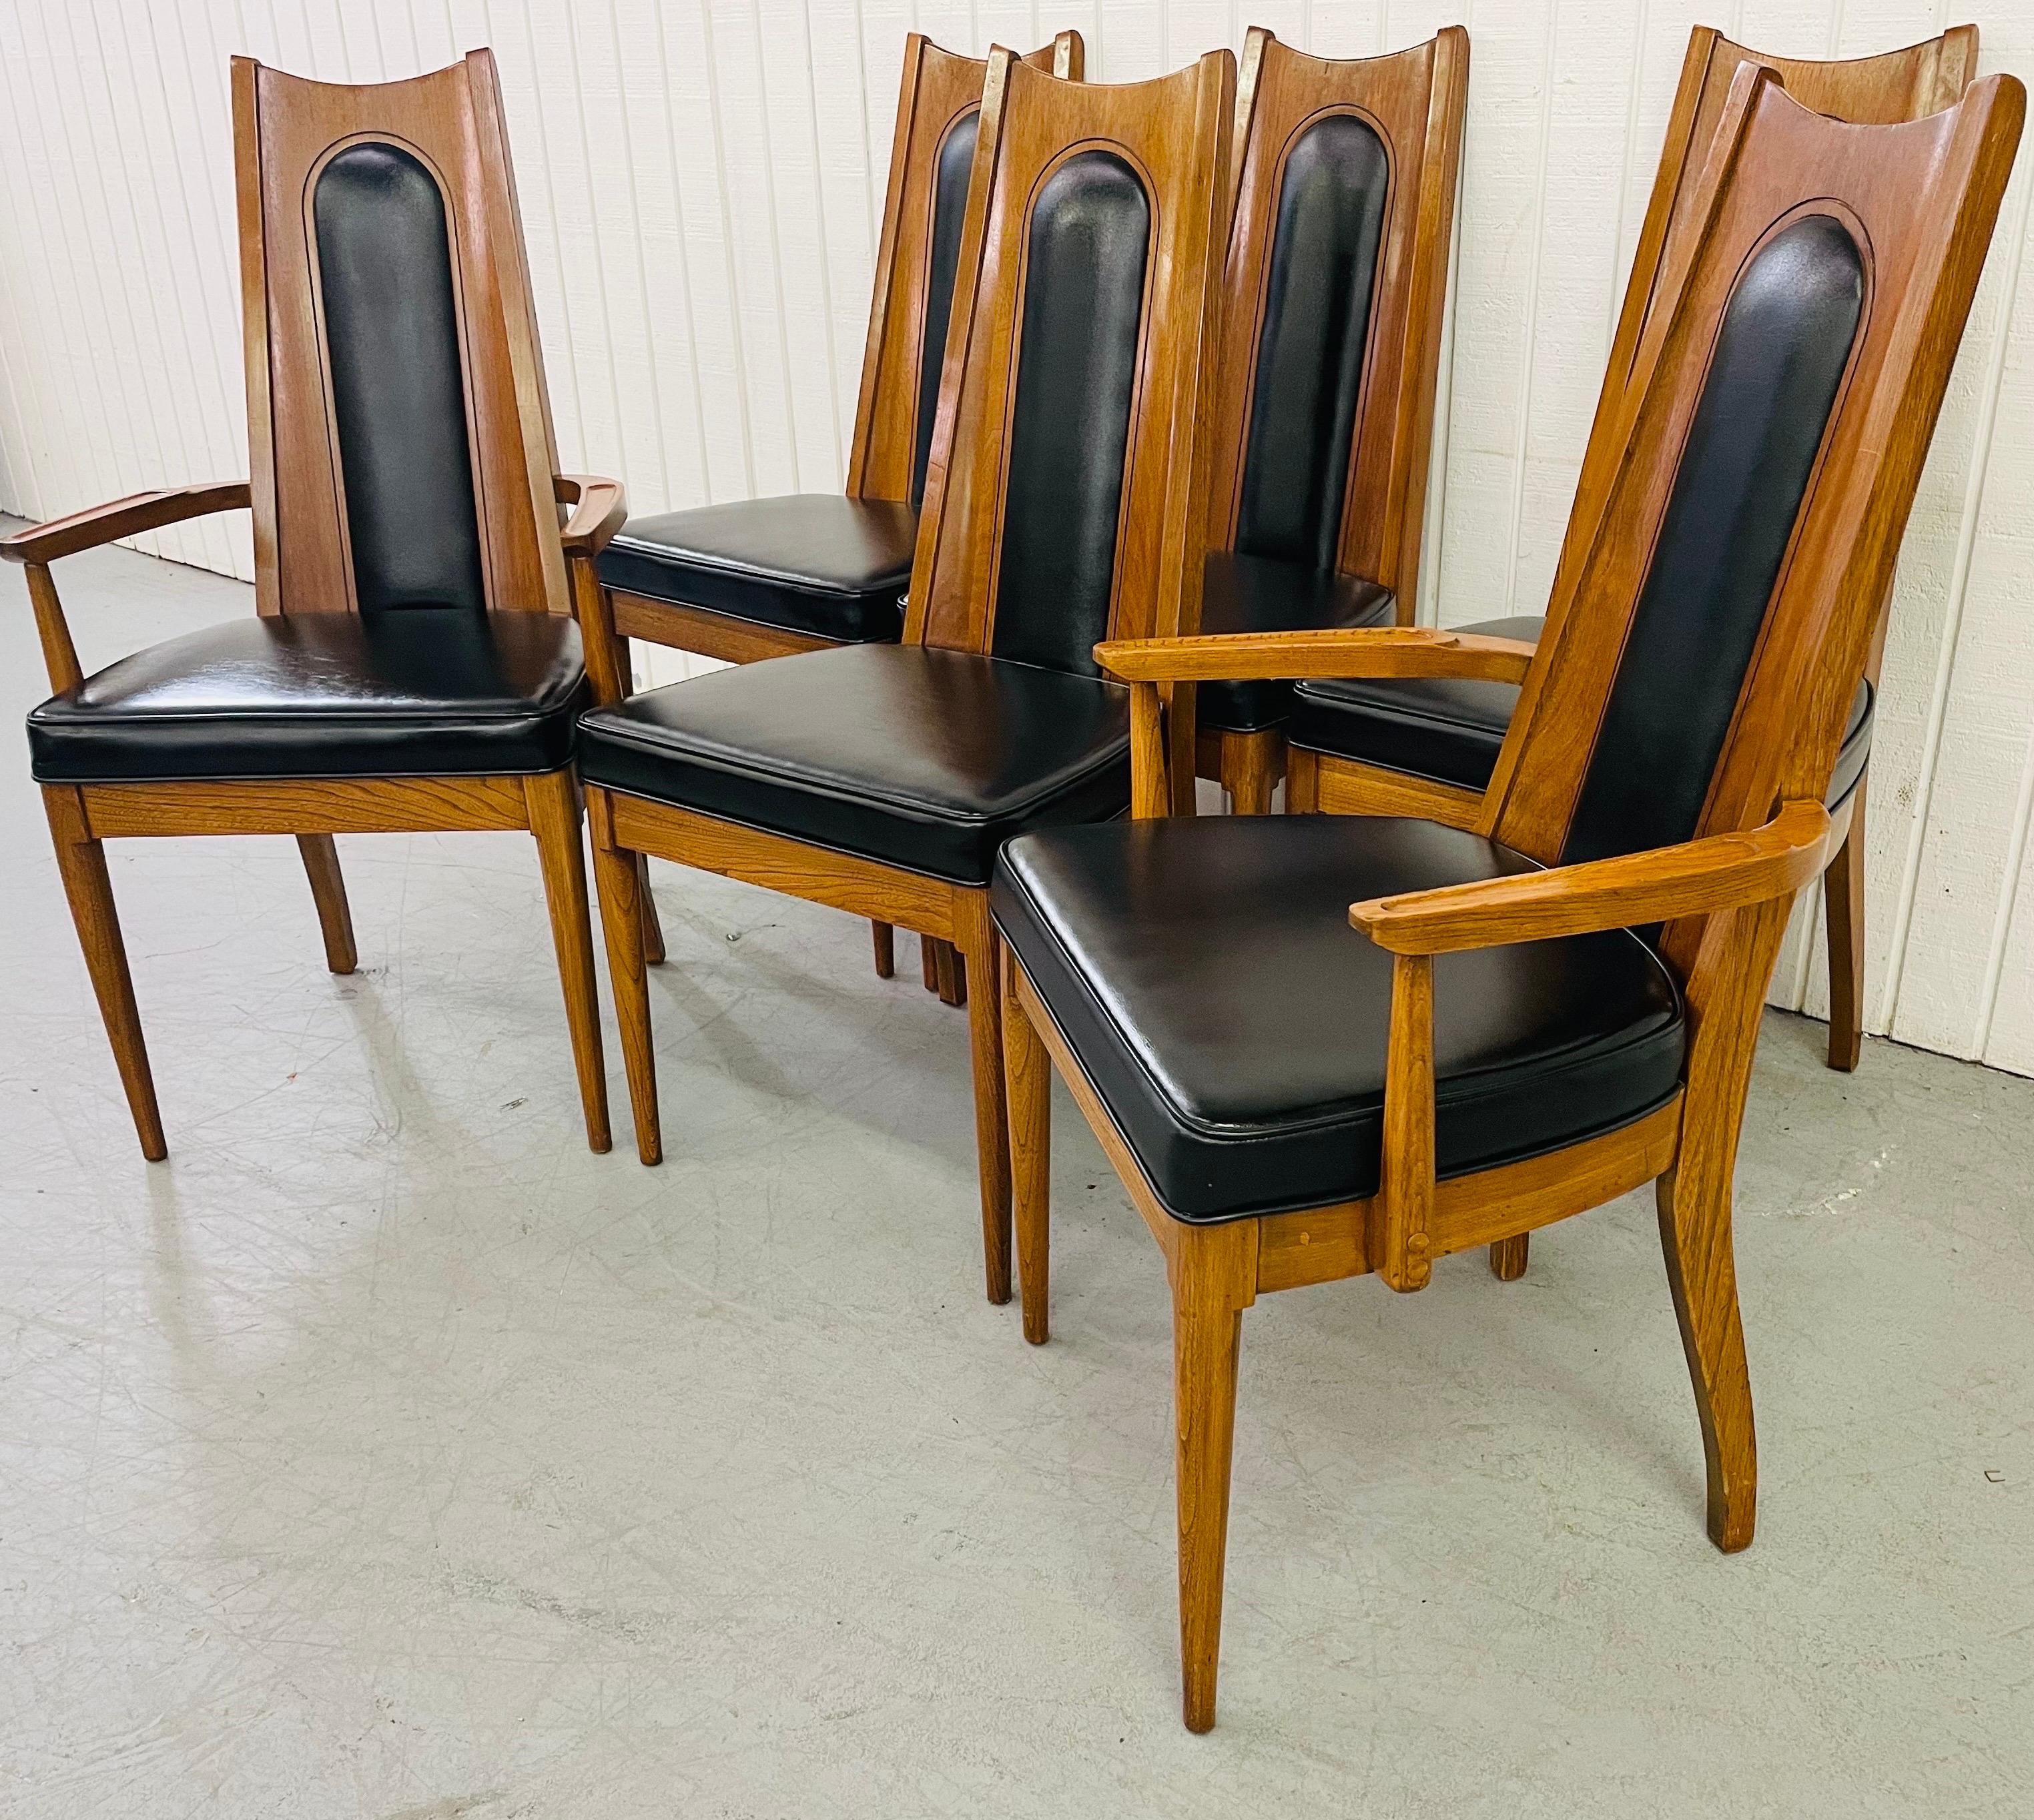 This listing is for a set of six mid-century kent coffey walnut dining chairs. Featuring two arm chairs, four straights, and an original black leather upholstery.